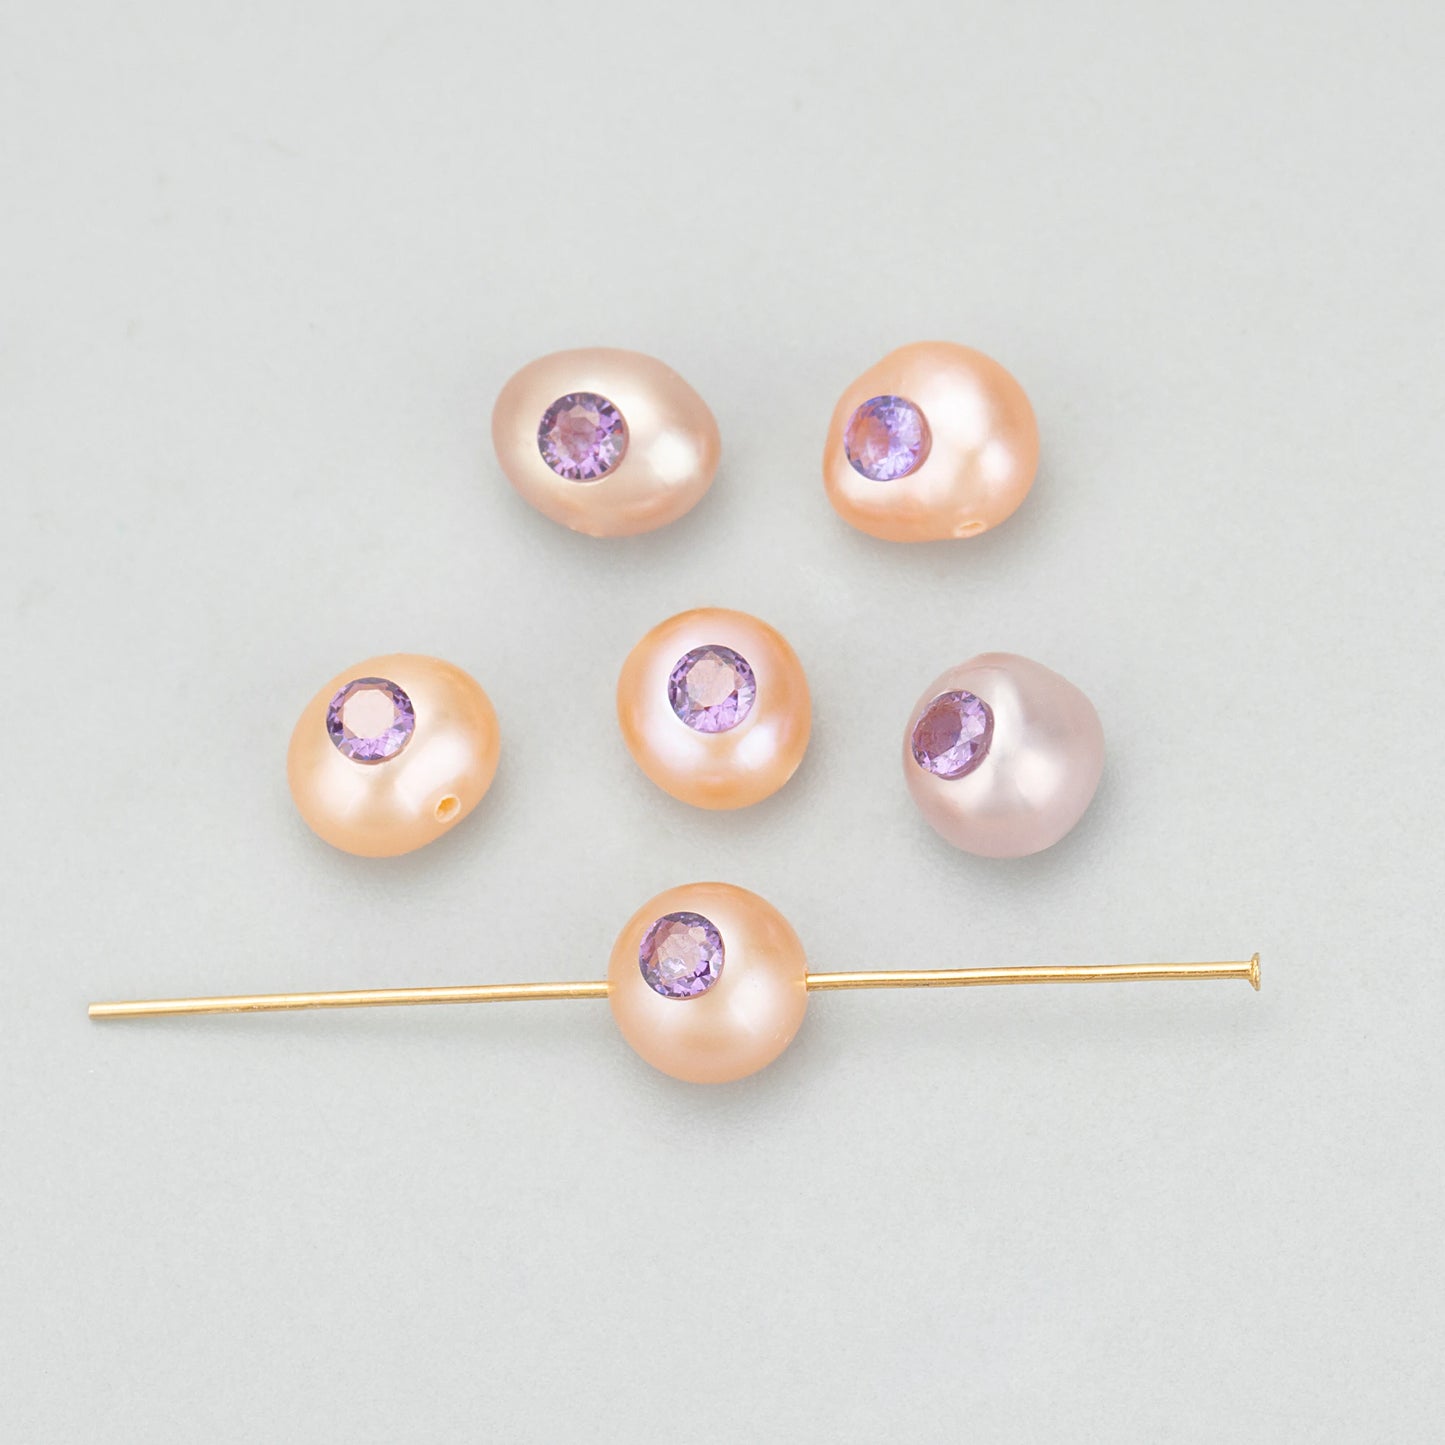 GUFEATHER MD97,natural pearl,jewelry accessories,pearl with zircons,jewelry making,hand made,charms,diy pendants,6pcs/lot